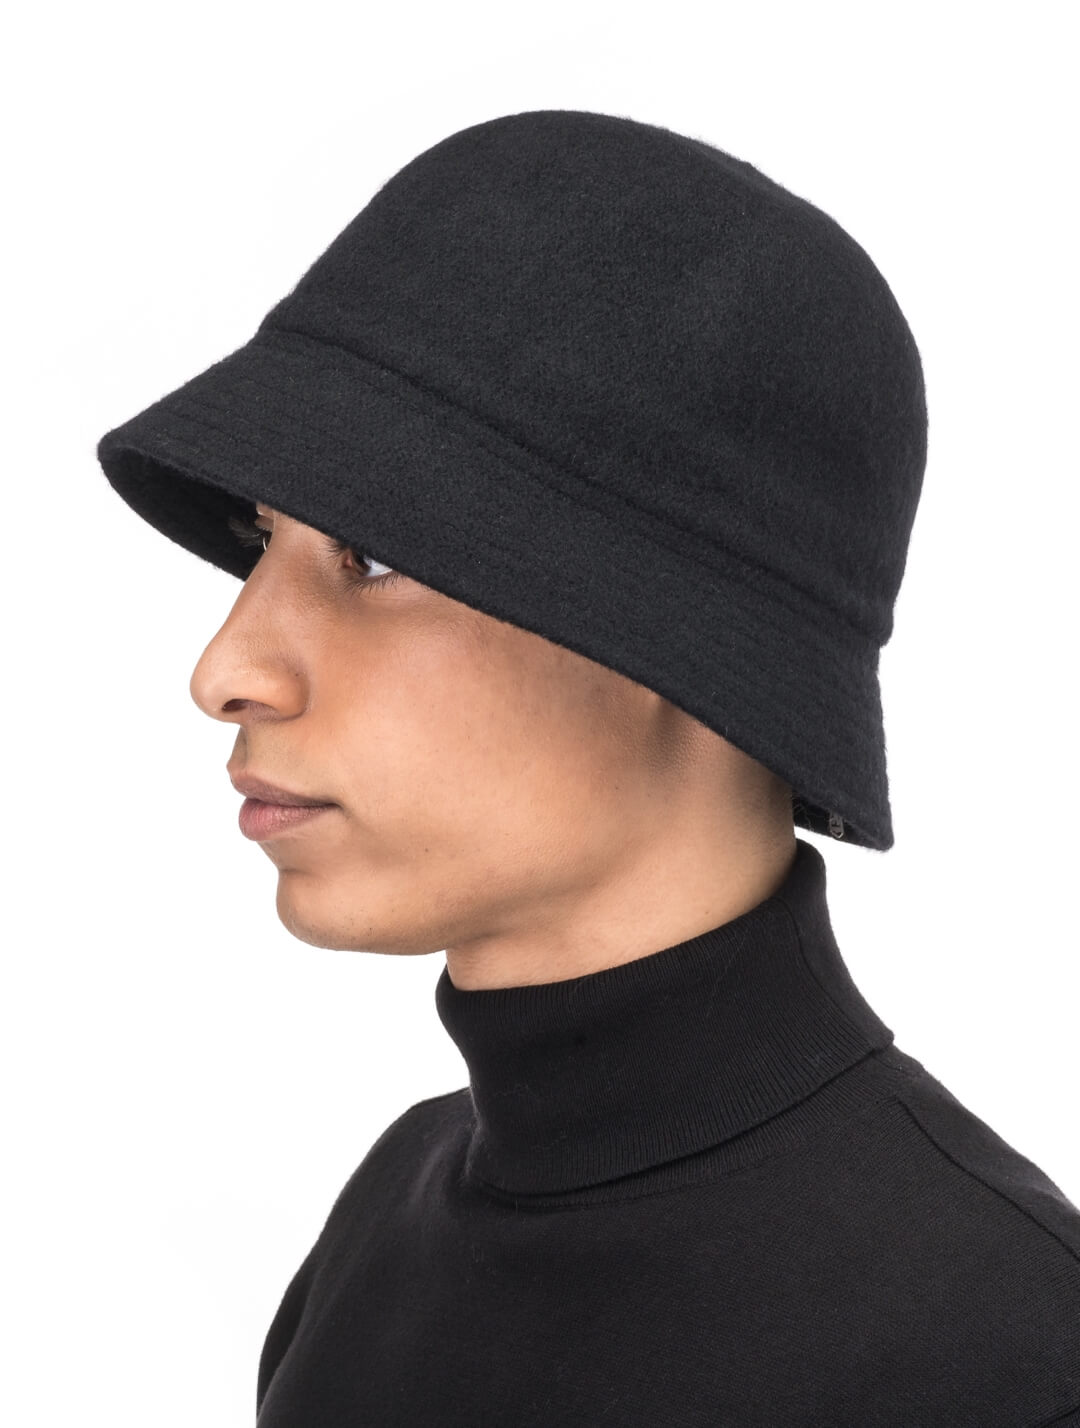 Jaylen Unisex Knit Moulded cloche bucket hat in brushed molded knit, mesh inner band, and trapunto stitching on brim, in Black